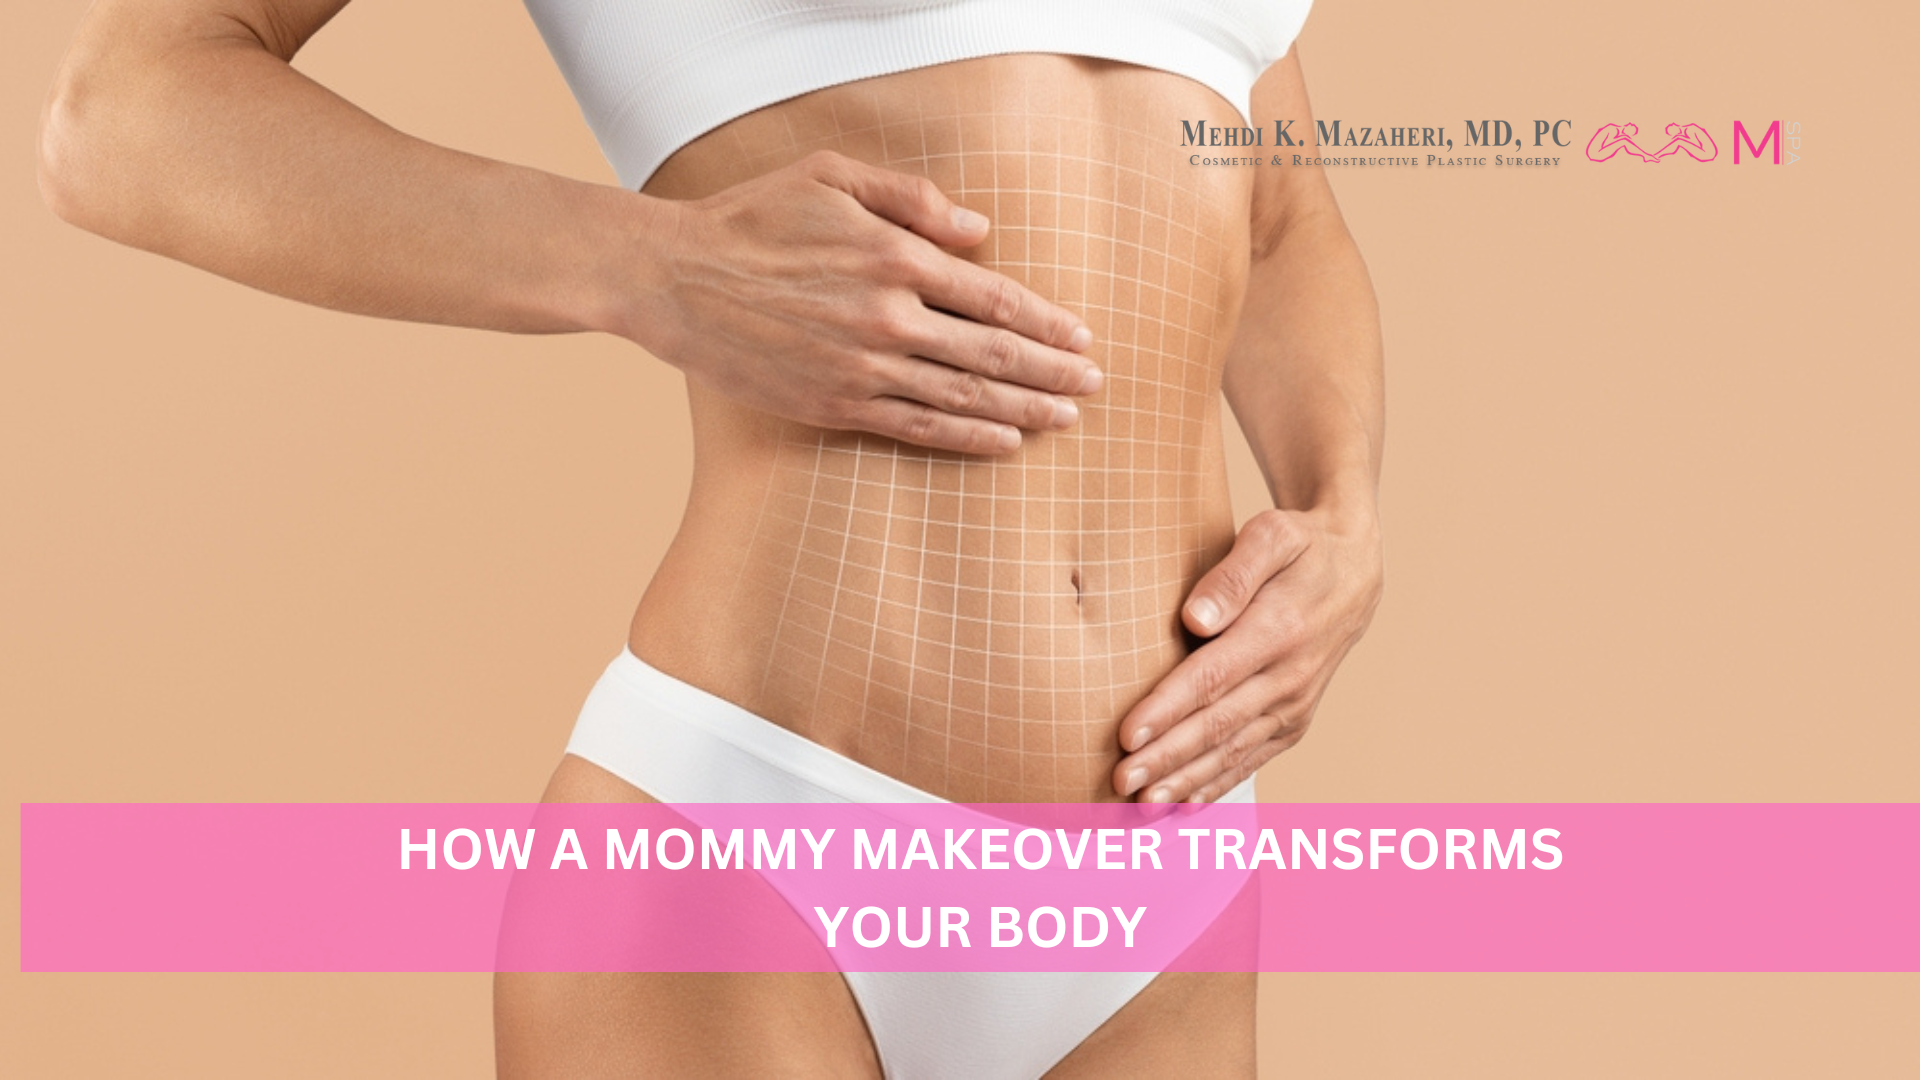 Transform your body with mommy makeover